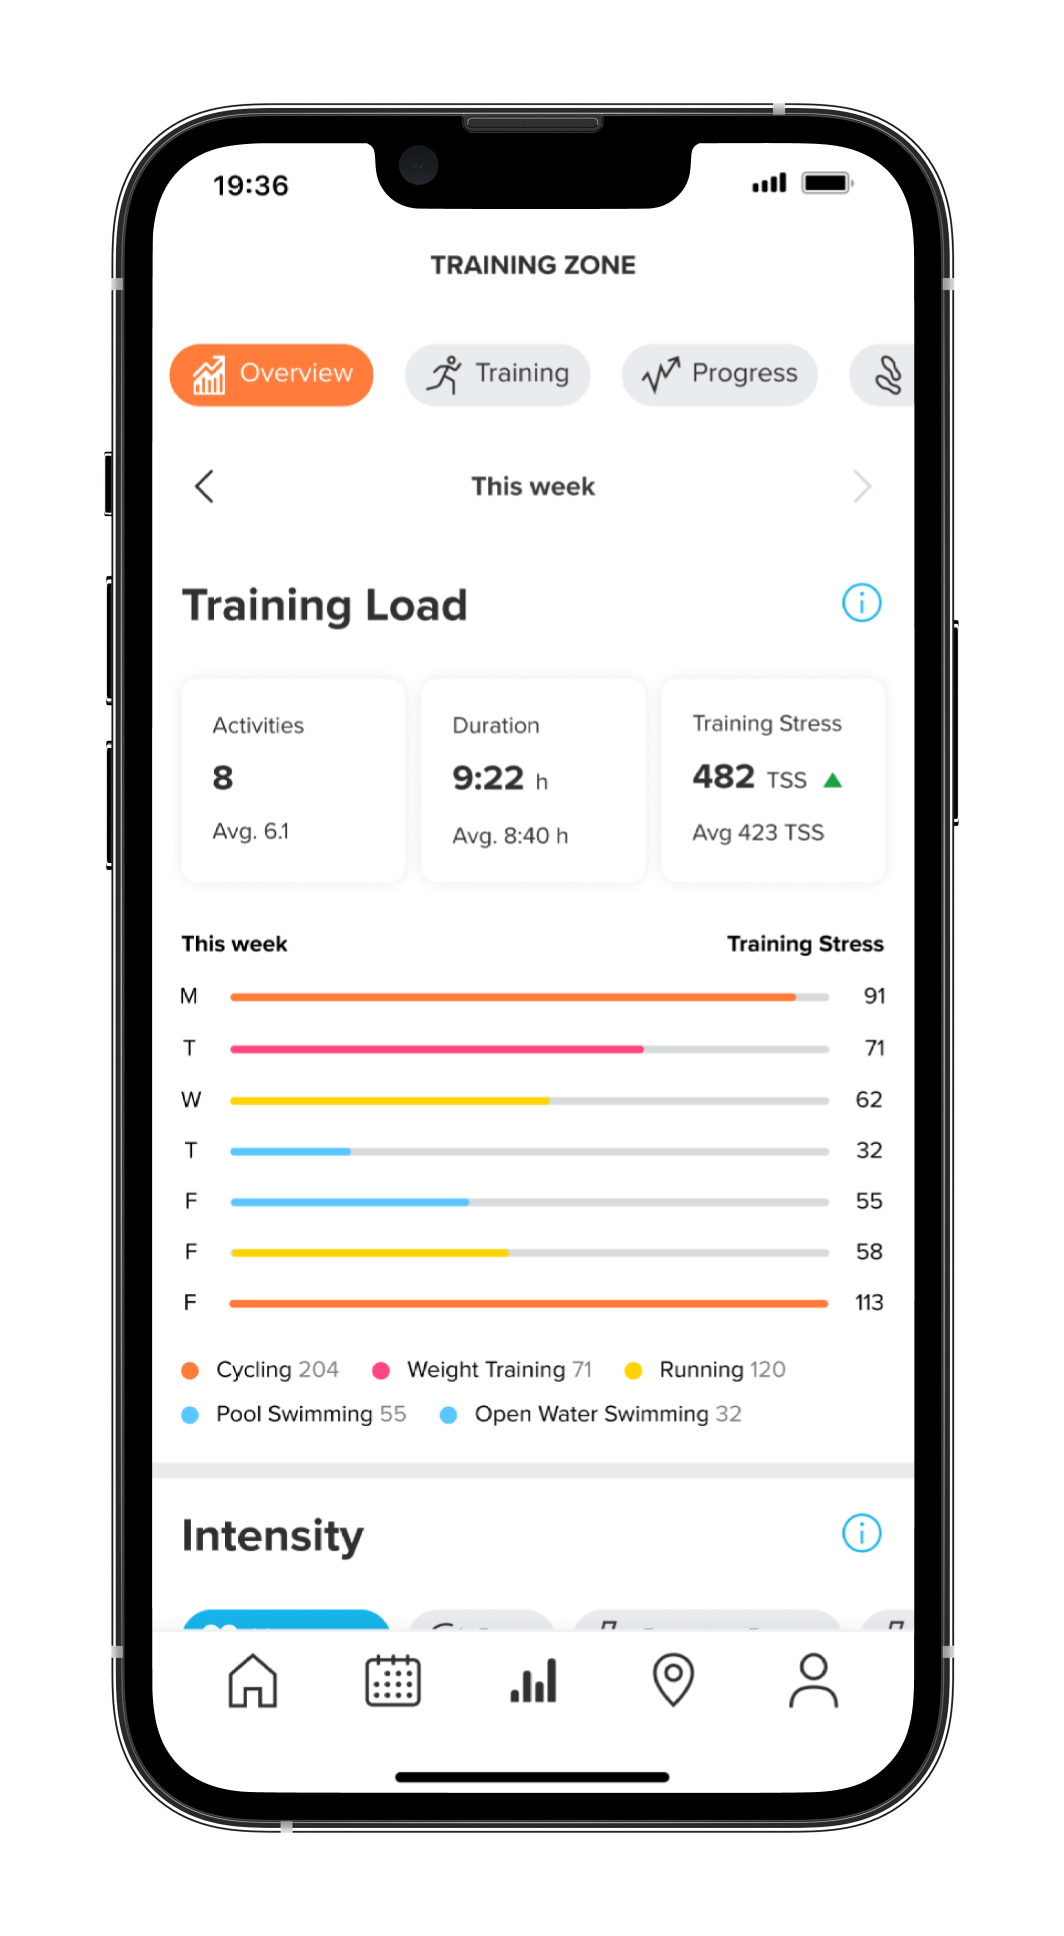 The training load theme in Suunto app’s Training zone gives you a good overview of this week’s training load compared to a six-week average.